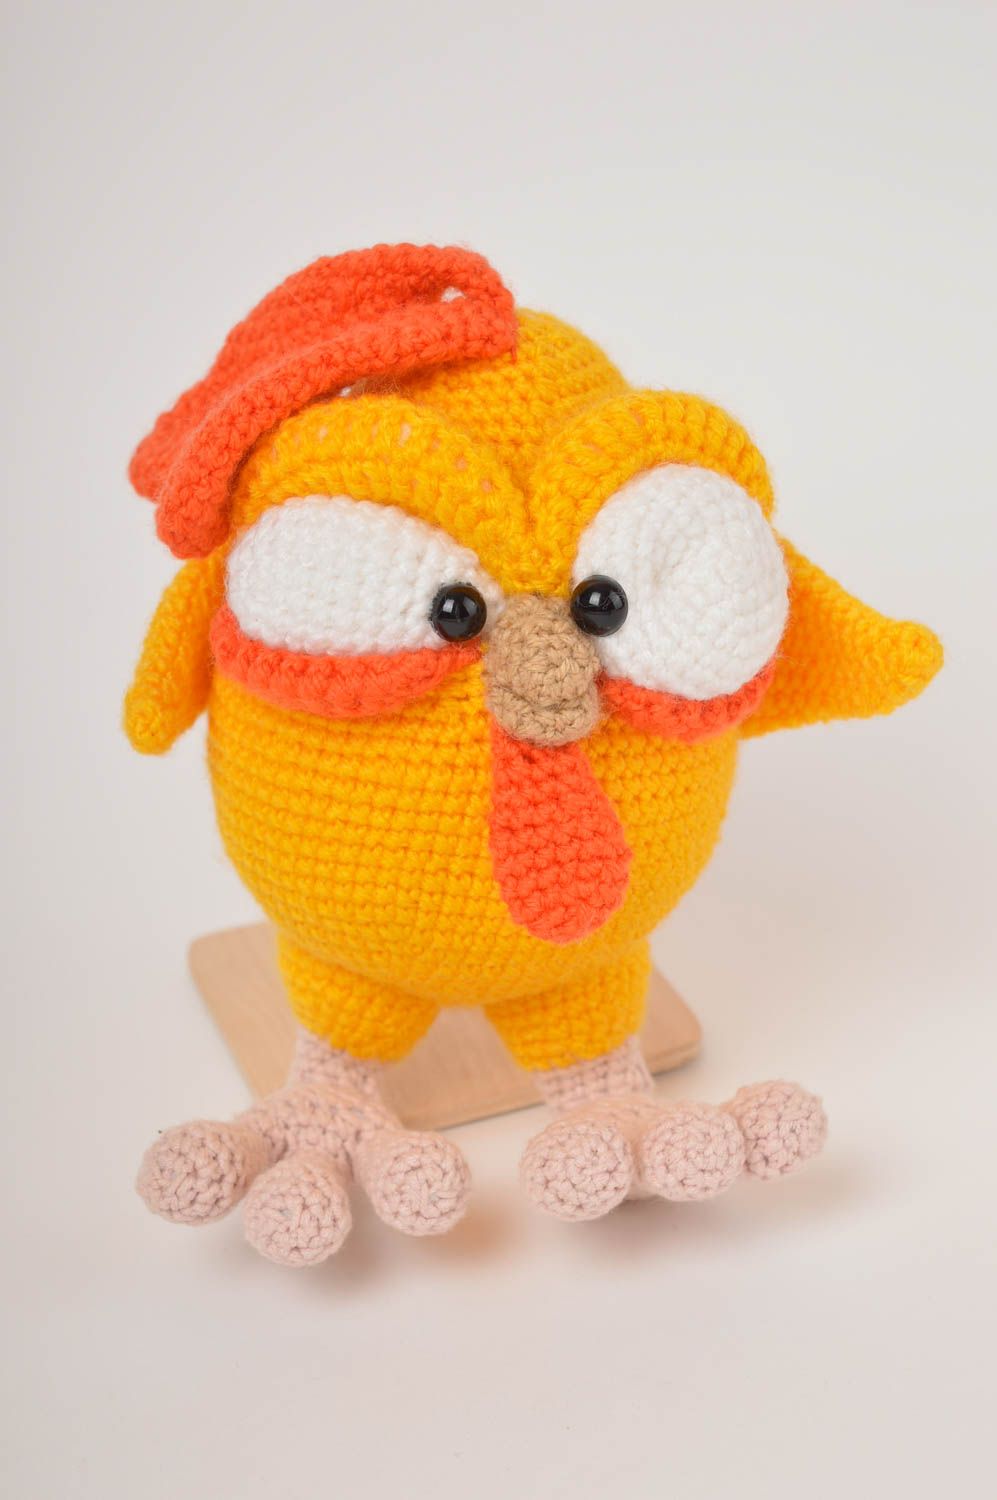 Cute toy hand-crocheted toys for children handmade stuffed toys for babies photo 2